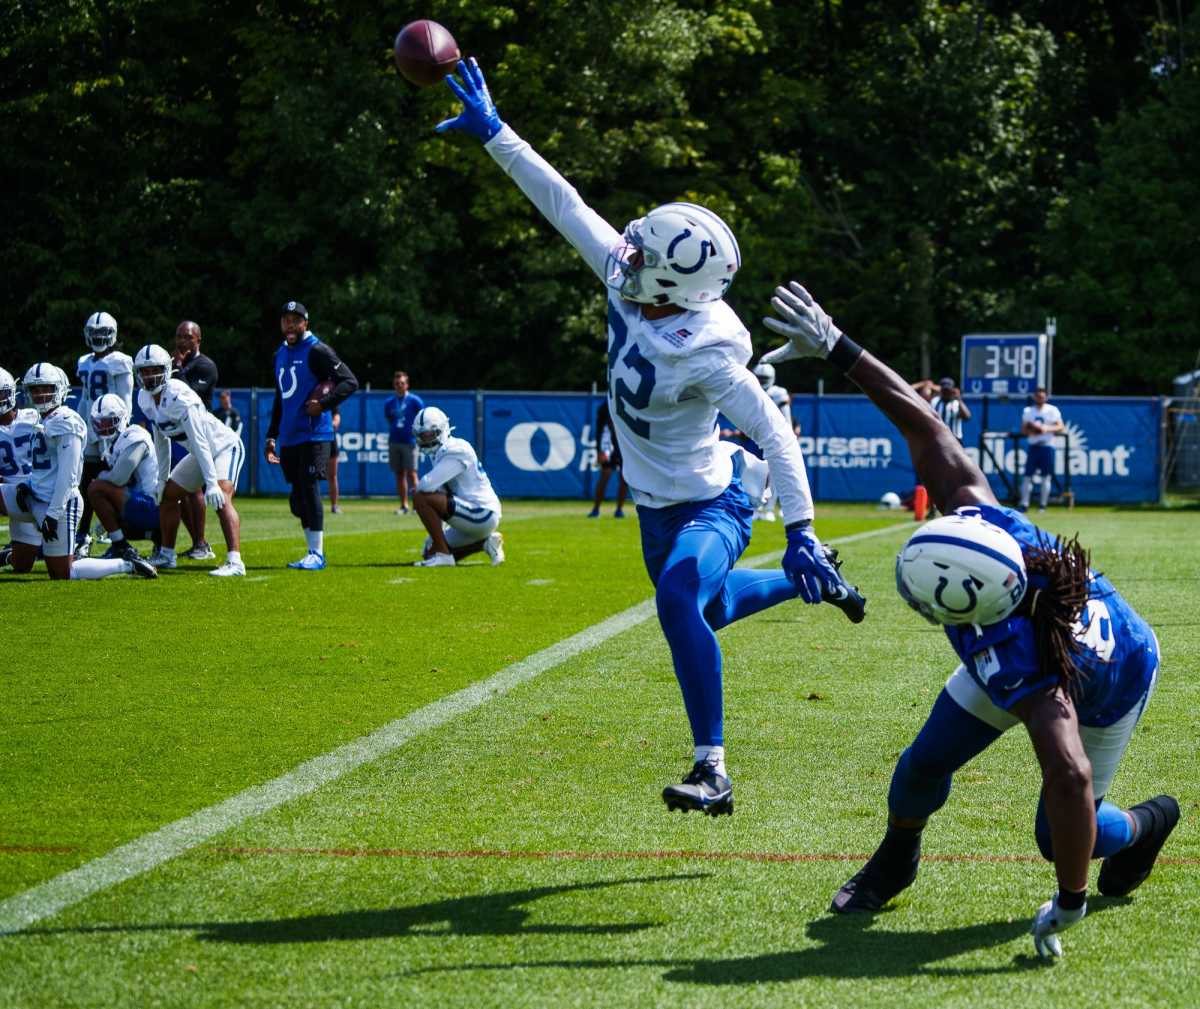 Indianapolis Colts safety Julian Blackmon (32) steps in front of and intercepts a pass Wednesday, Aug. 24, 2022, intended for tight end Mo Alie-Cox (81) during training camp at Grand Park Sports Campus in Westfield, Indiana. Indianapolis Colts Training Camp Wednesday